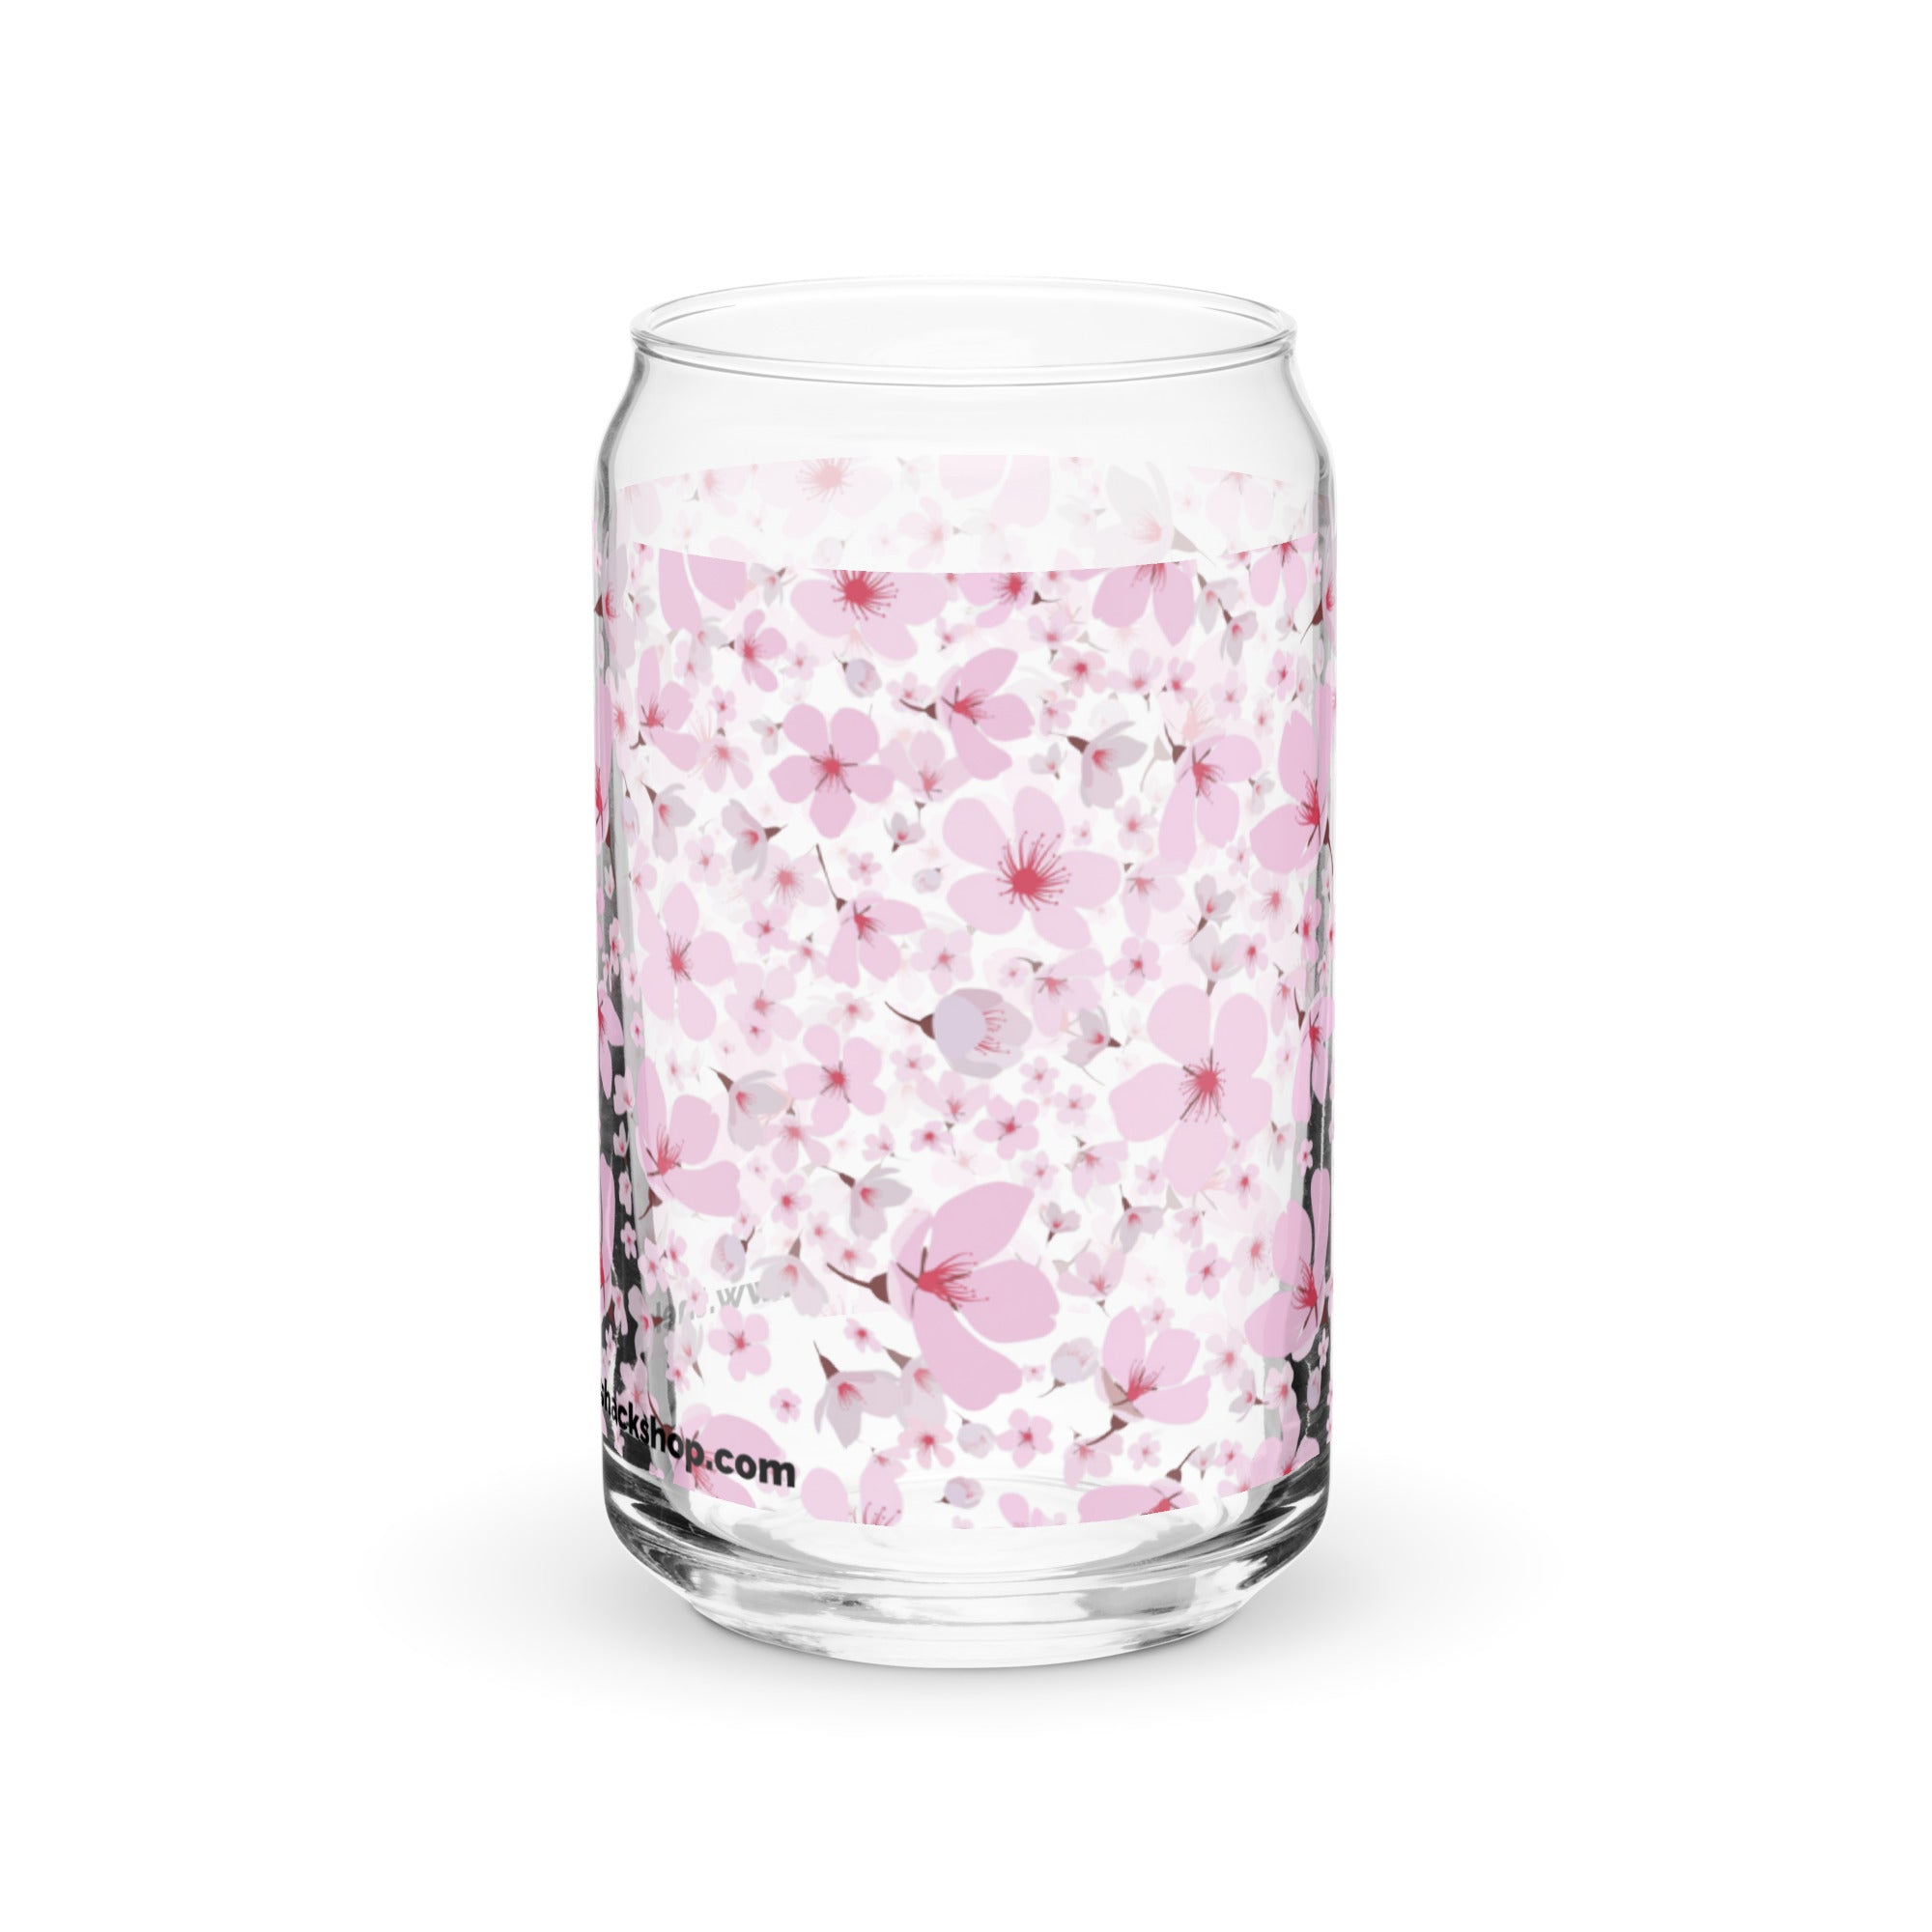 Can-Shaped Glass (16oz) - Cherry Blossoms